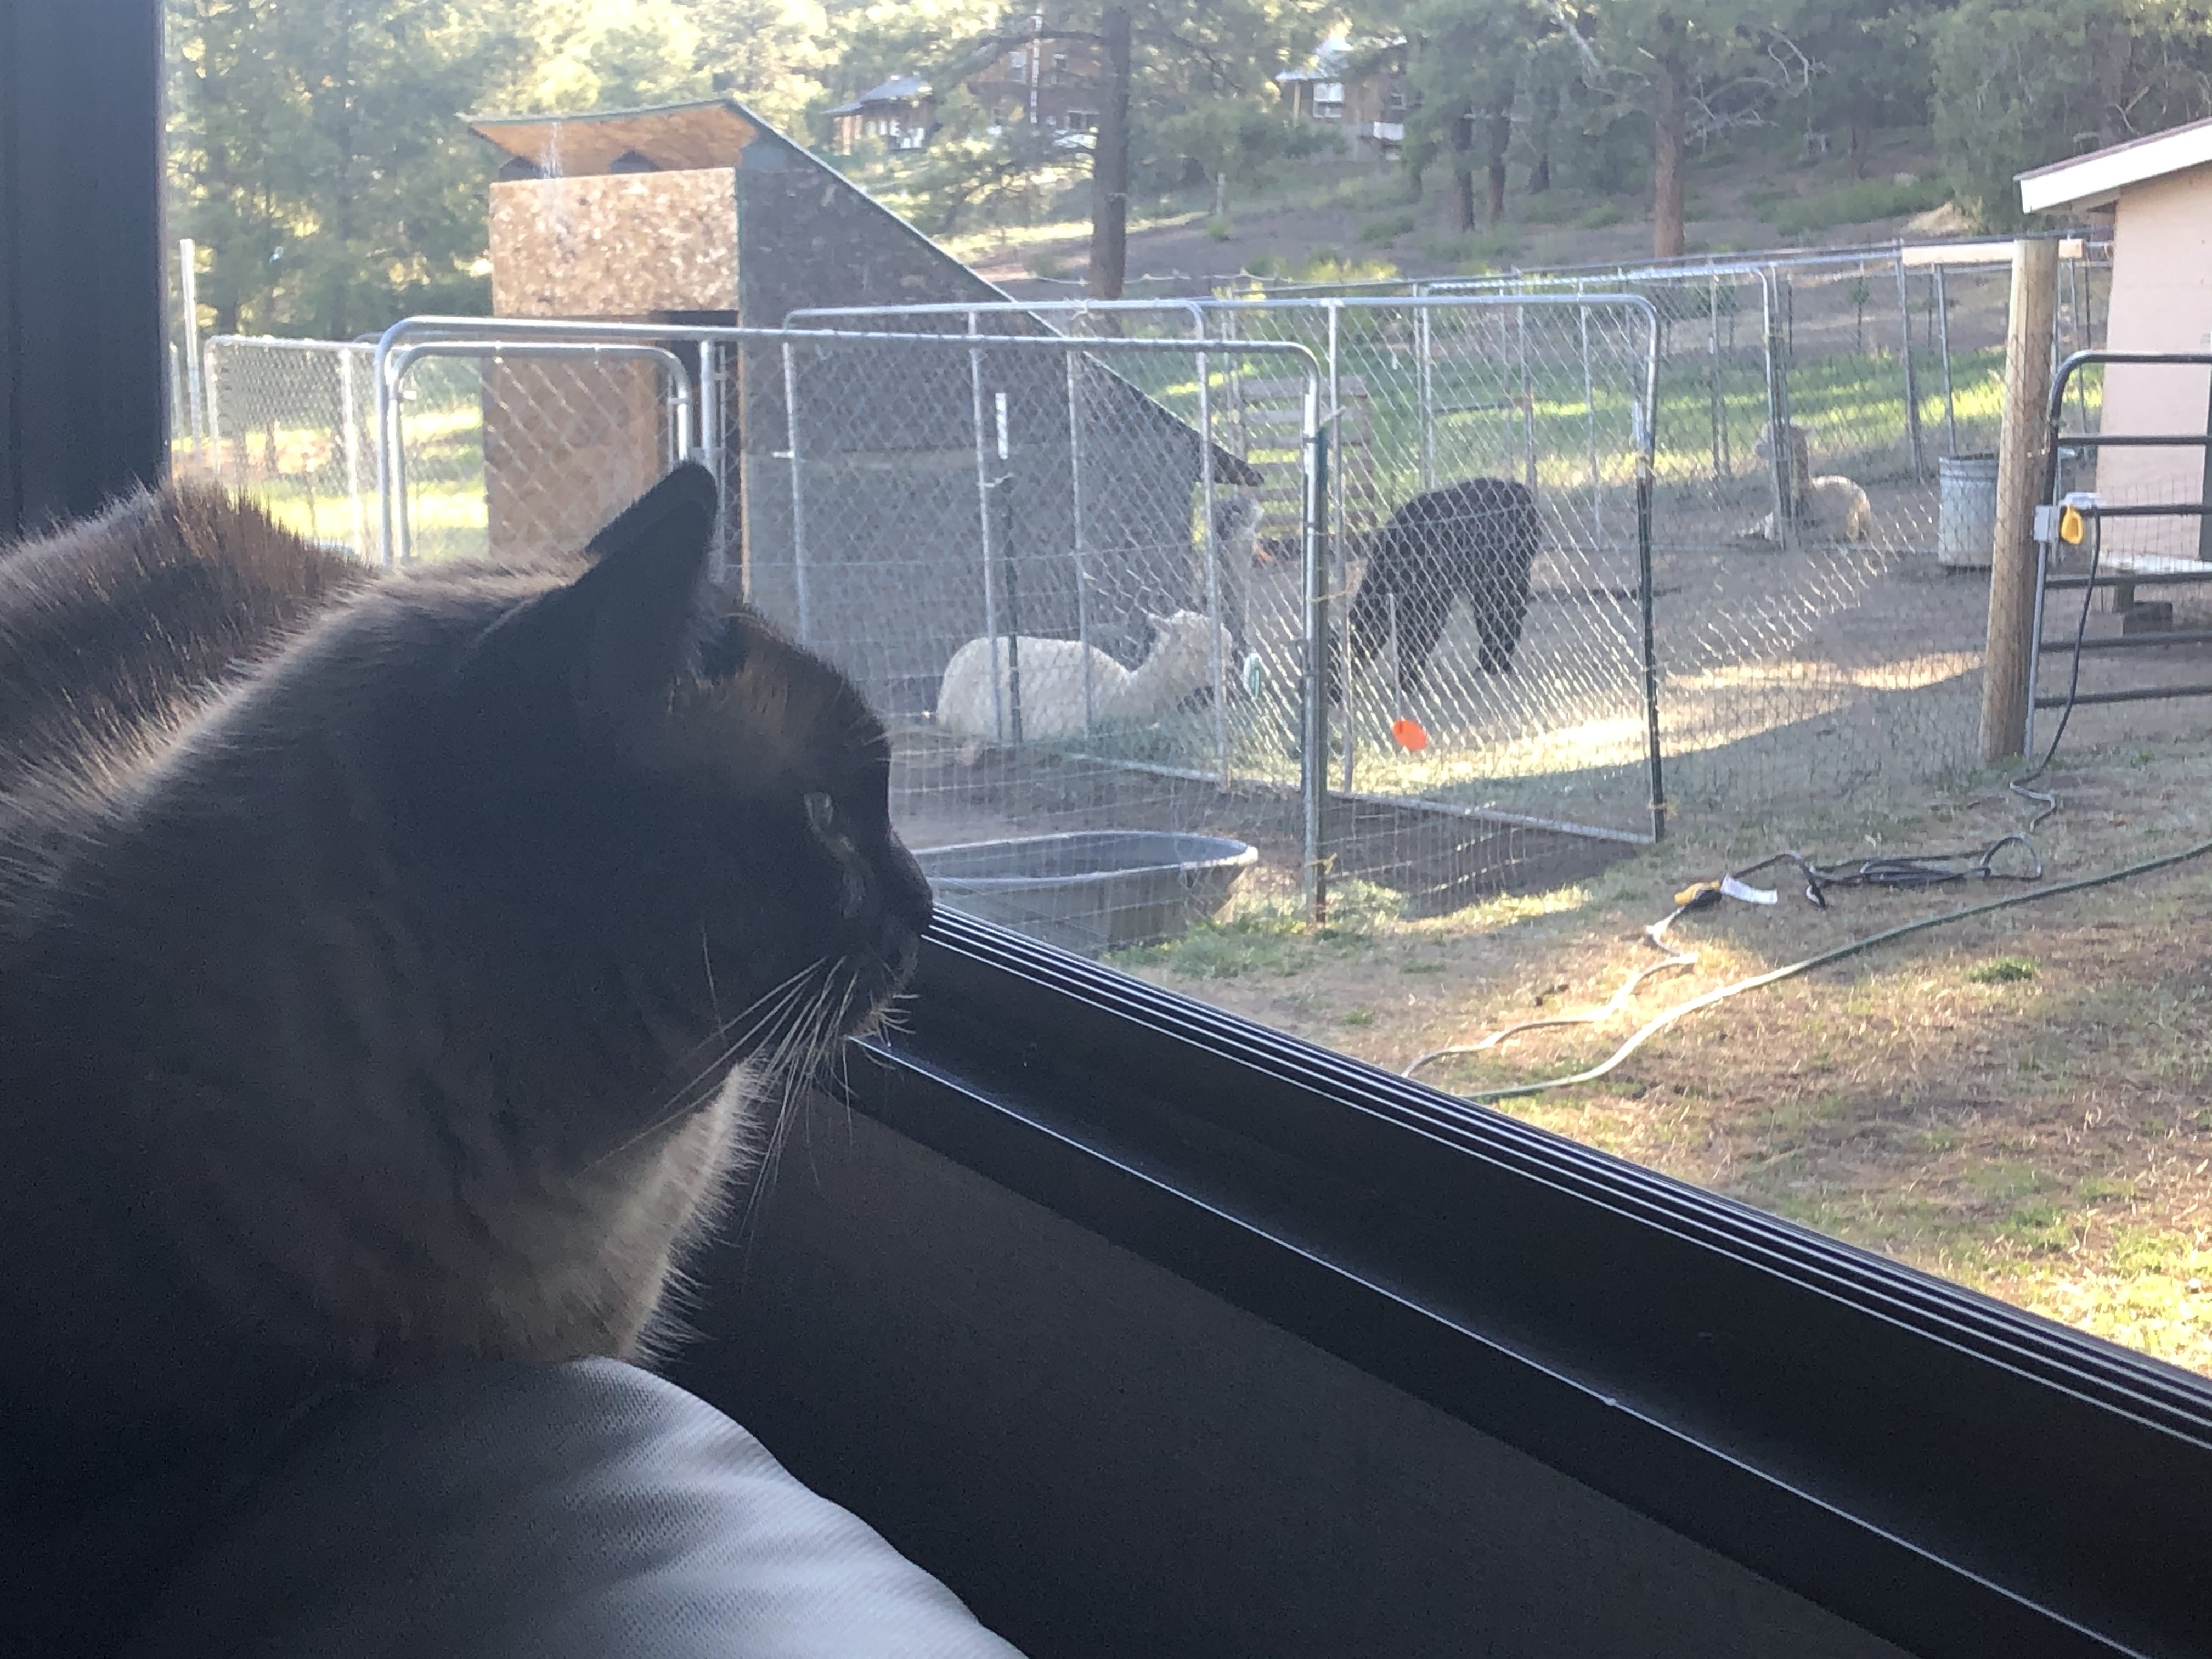 Lumpy looking out the window at the alpacas